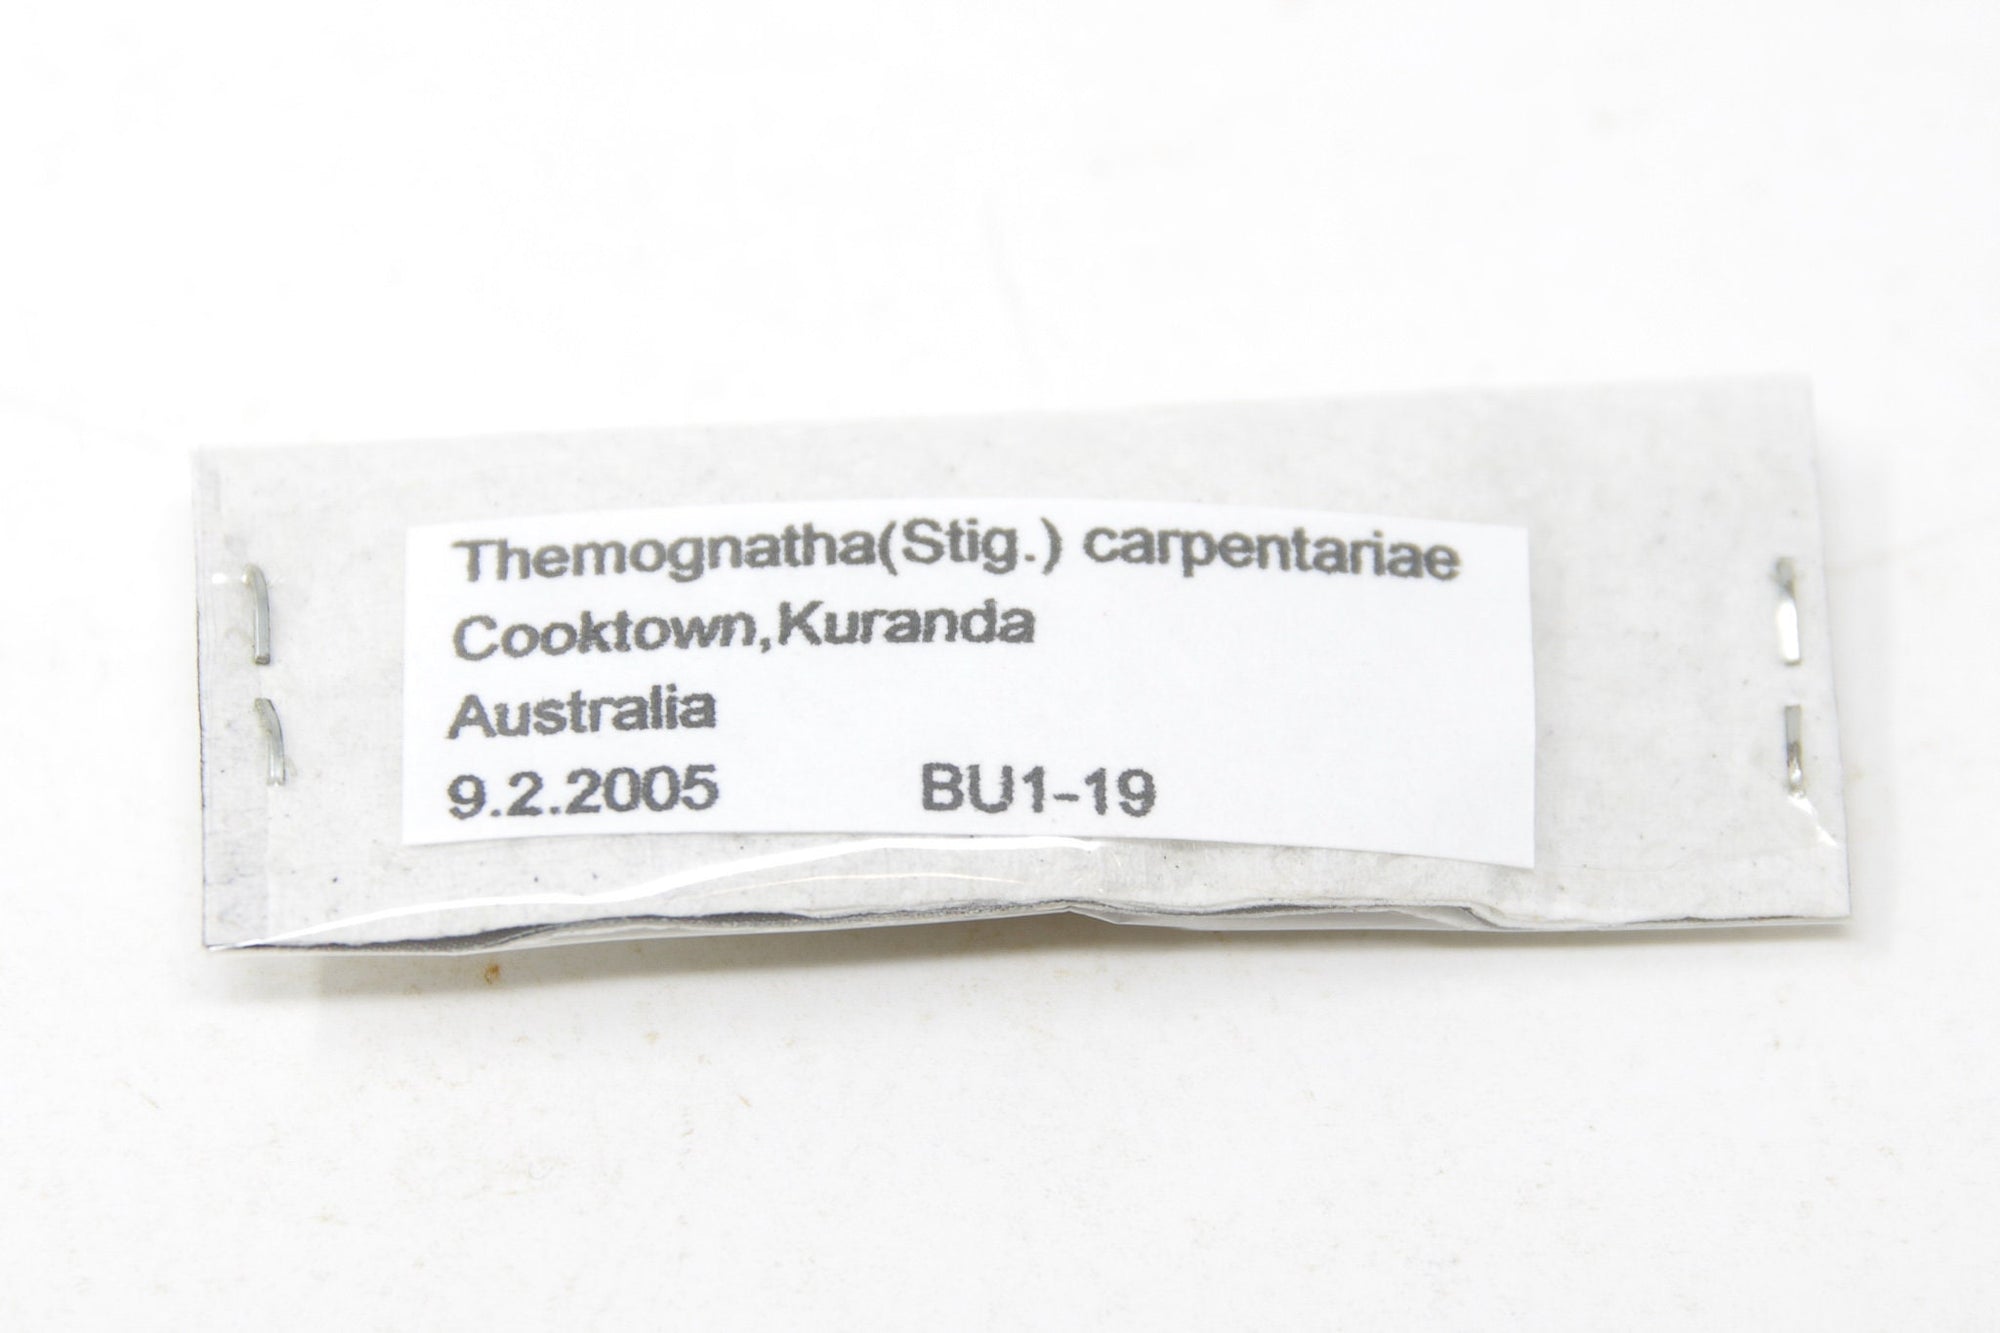 Temognatha carpentariae, Unmounted Buprestinae Jewel Beetles with Scientific Collection Data, A1 Quality